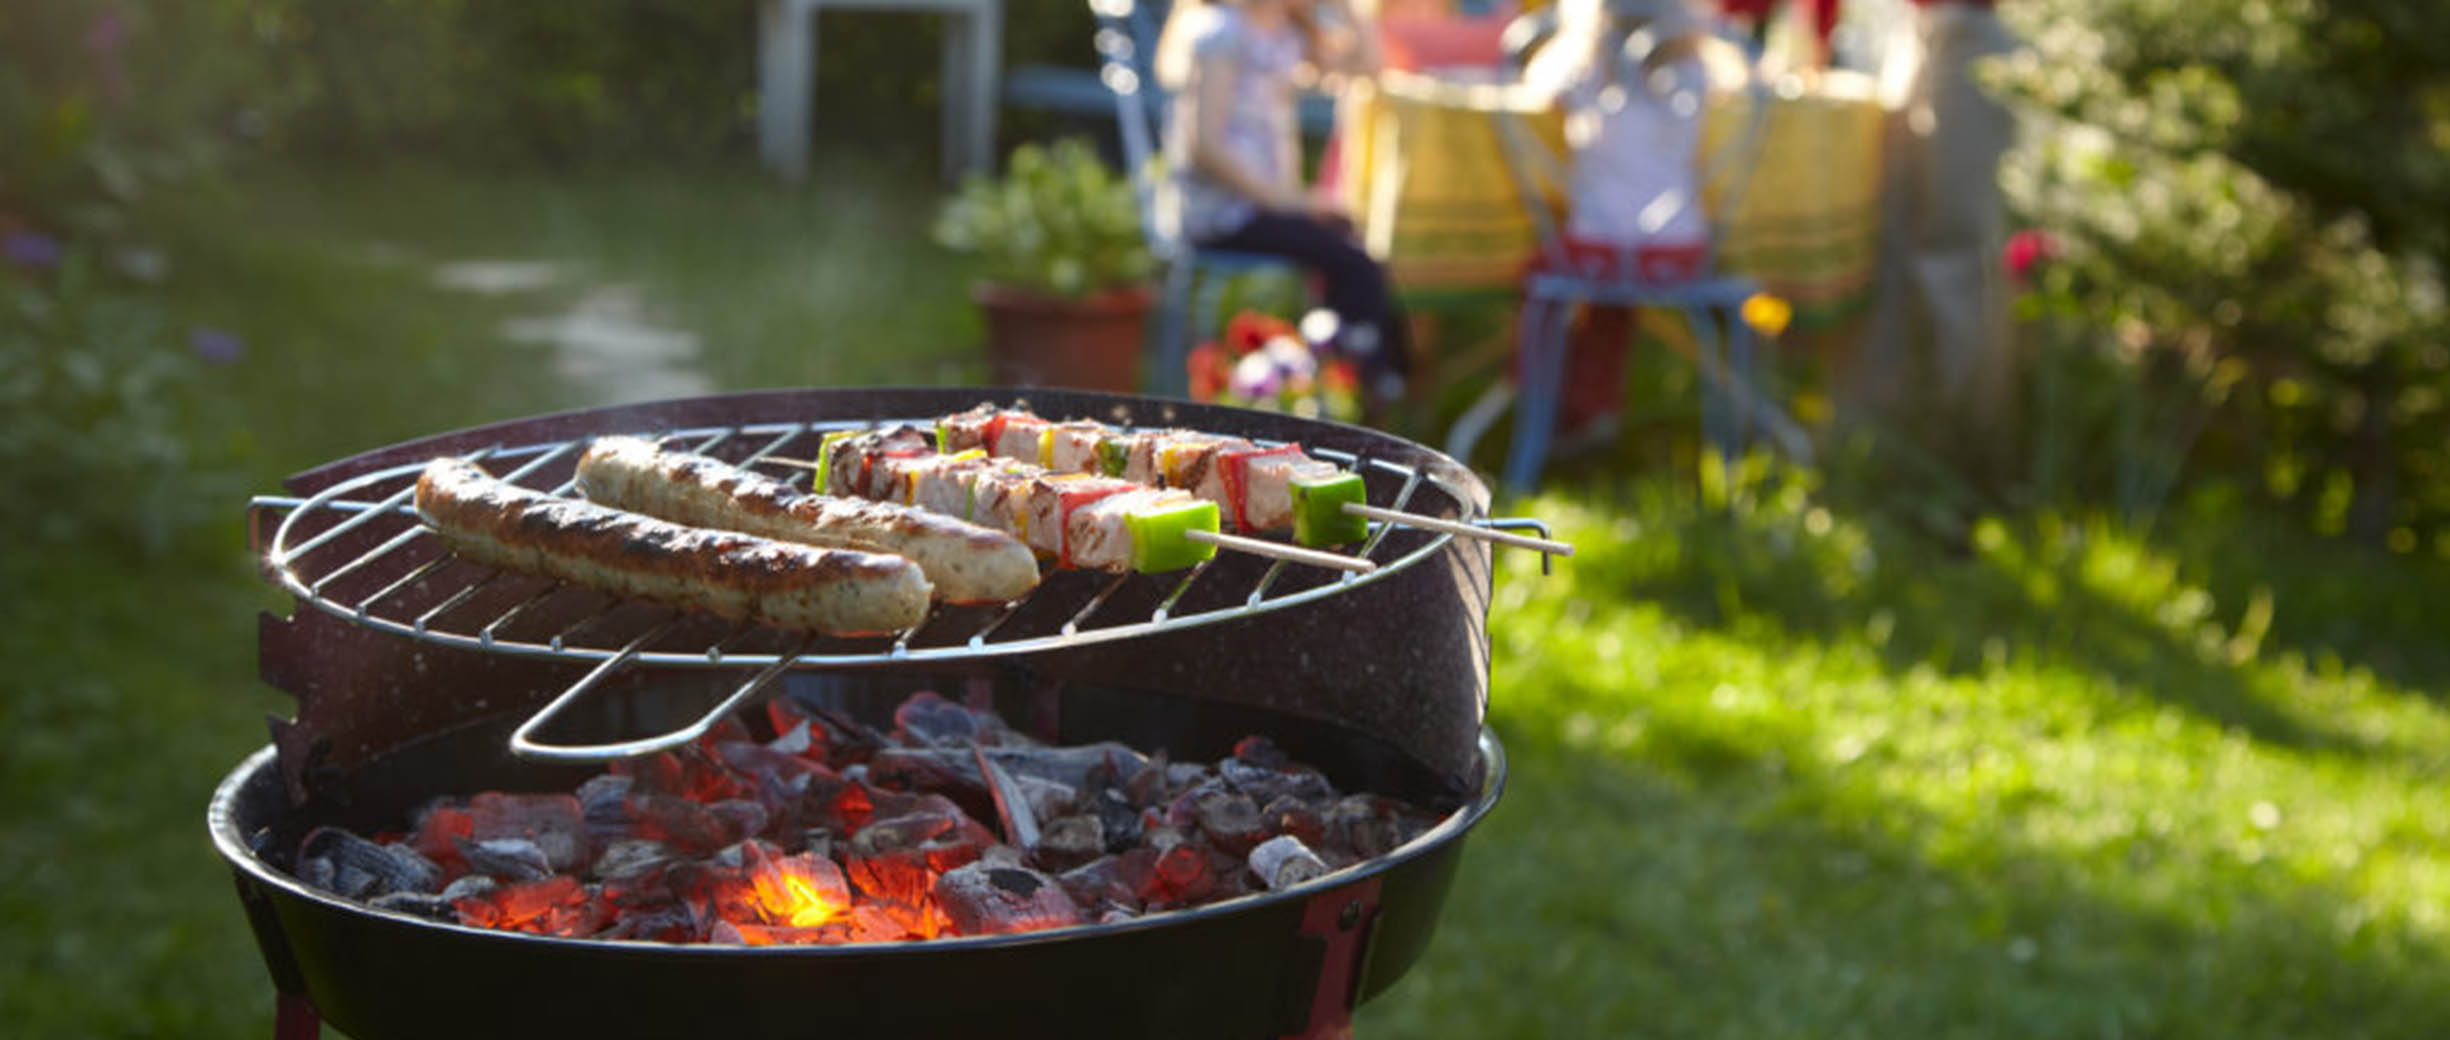 Discounted picnic barbecues